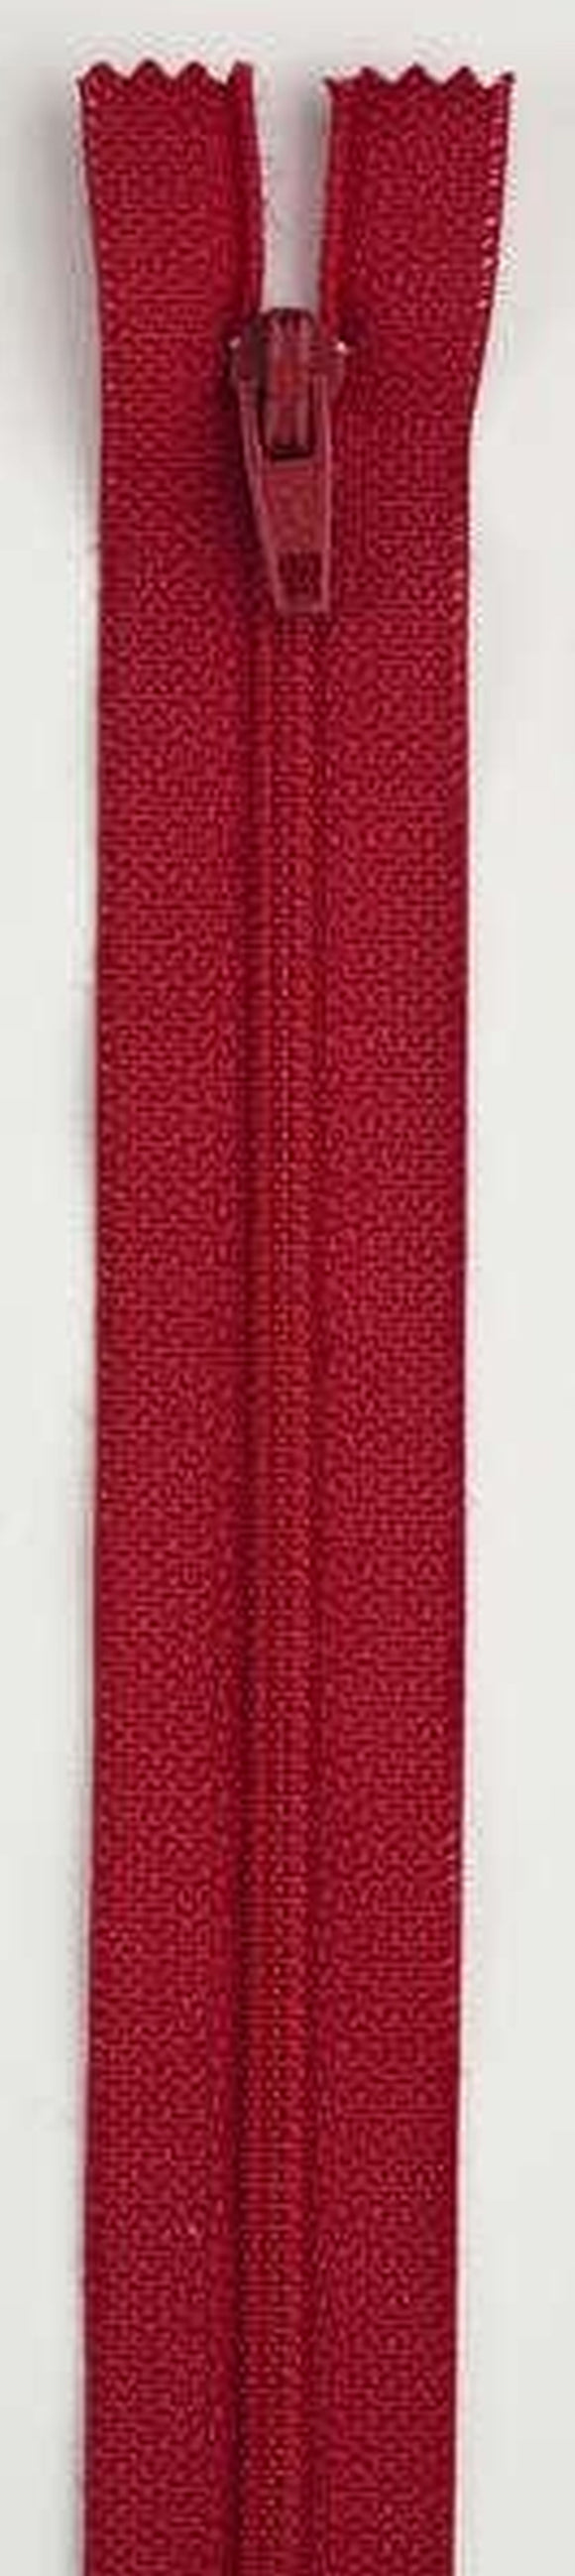 All-Purpose Polyester Coil Zipper 20in Red - F7220-128 by Coats and Clark